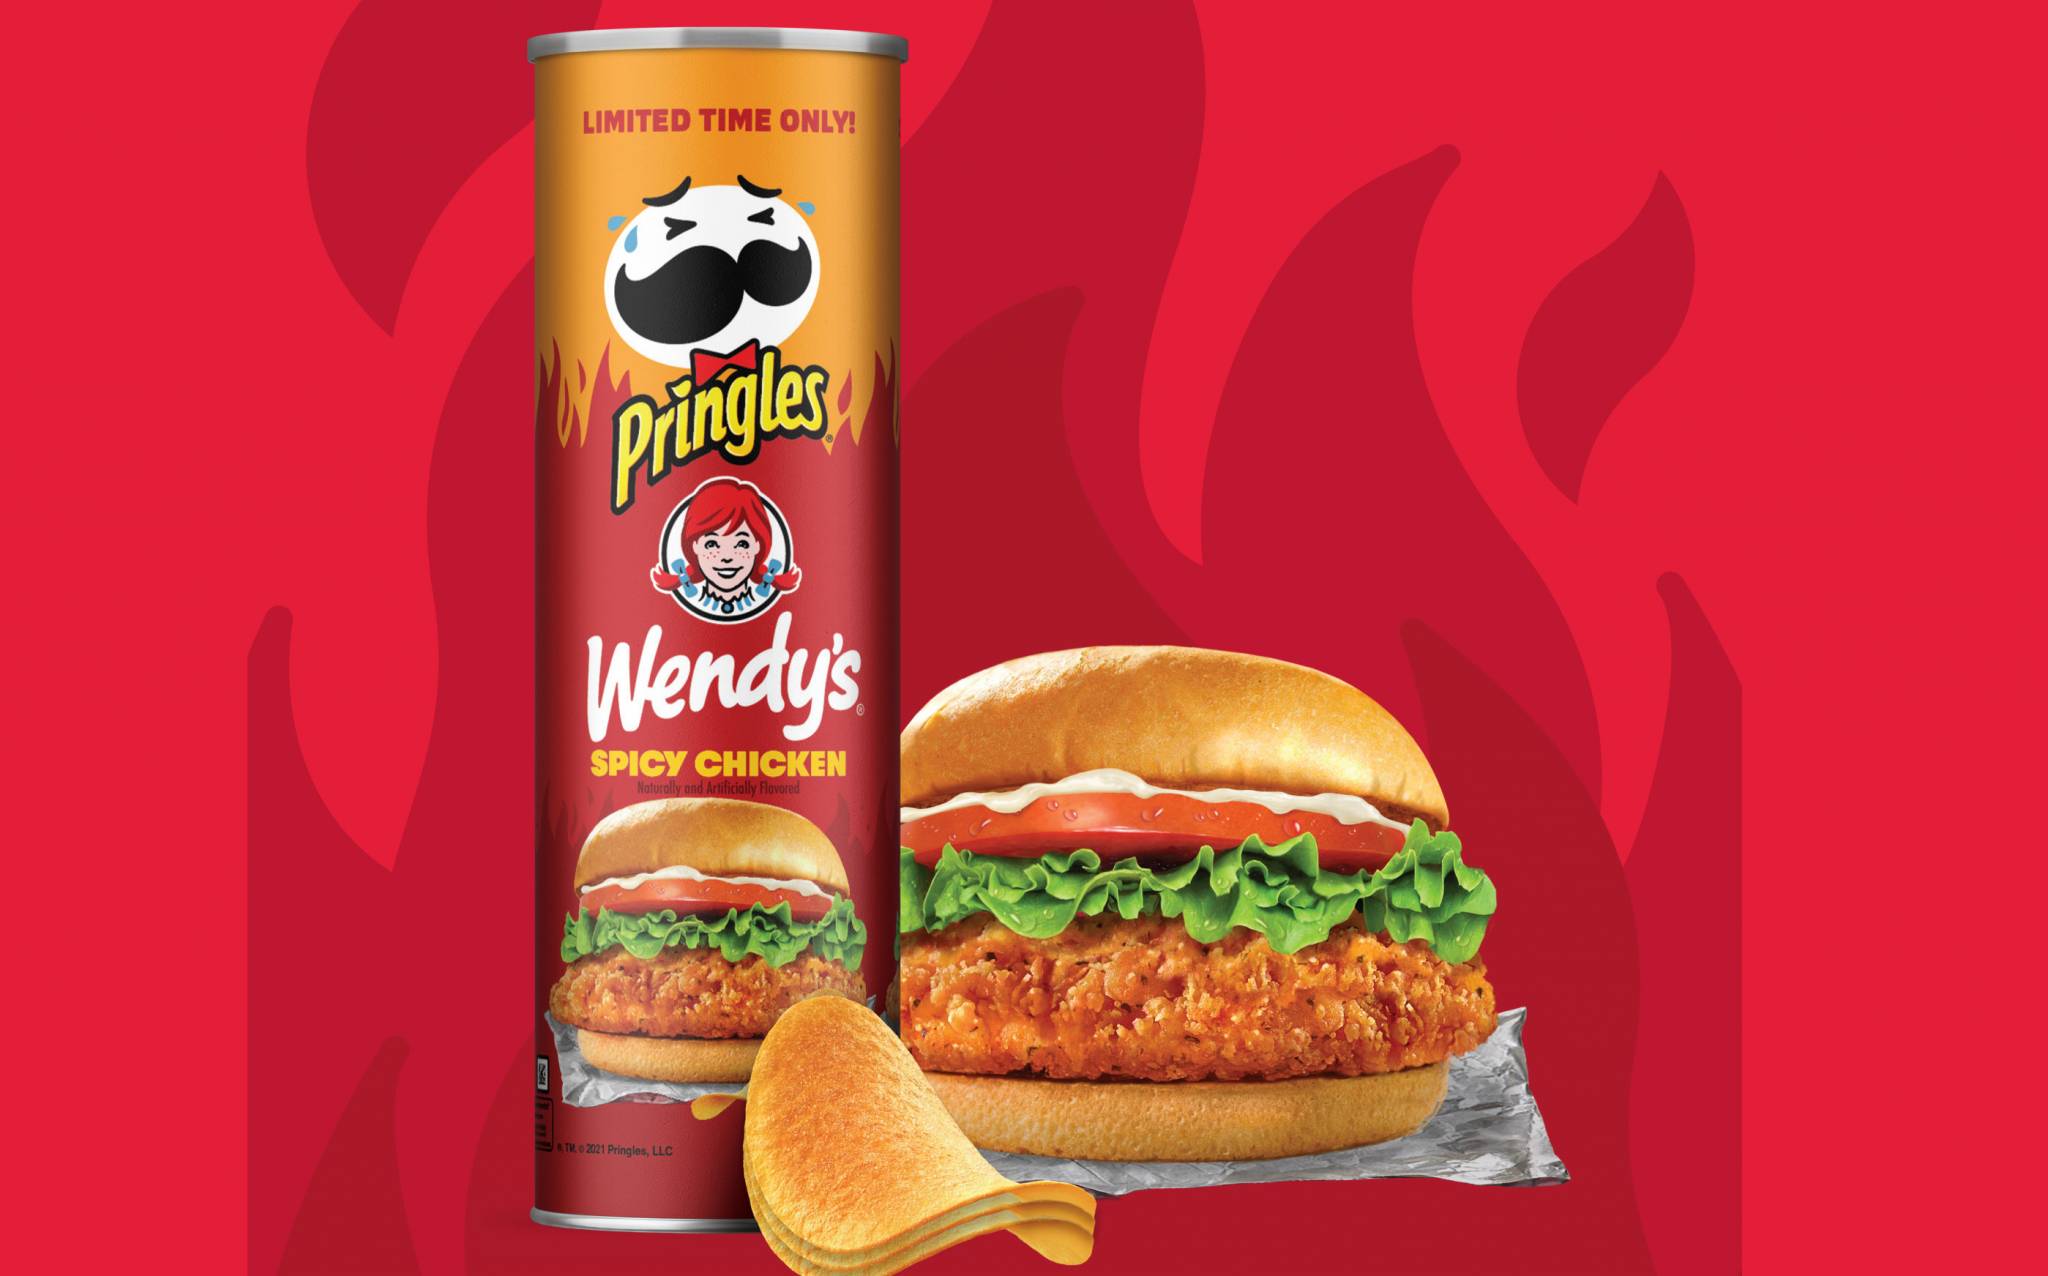 Kellogg partners with Wendy’s to launch Pringles Spicy Chicken flavour